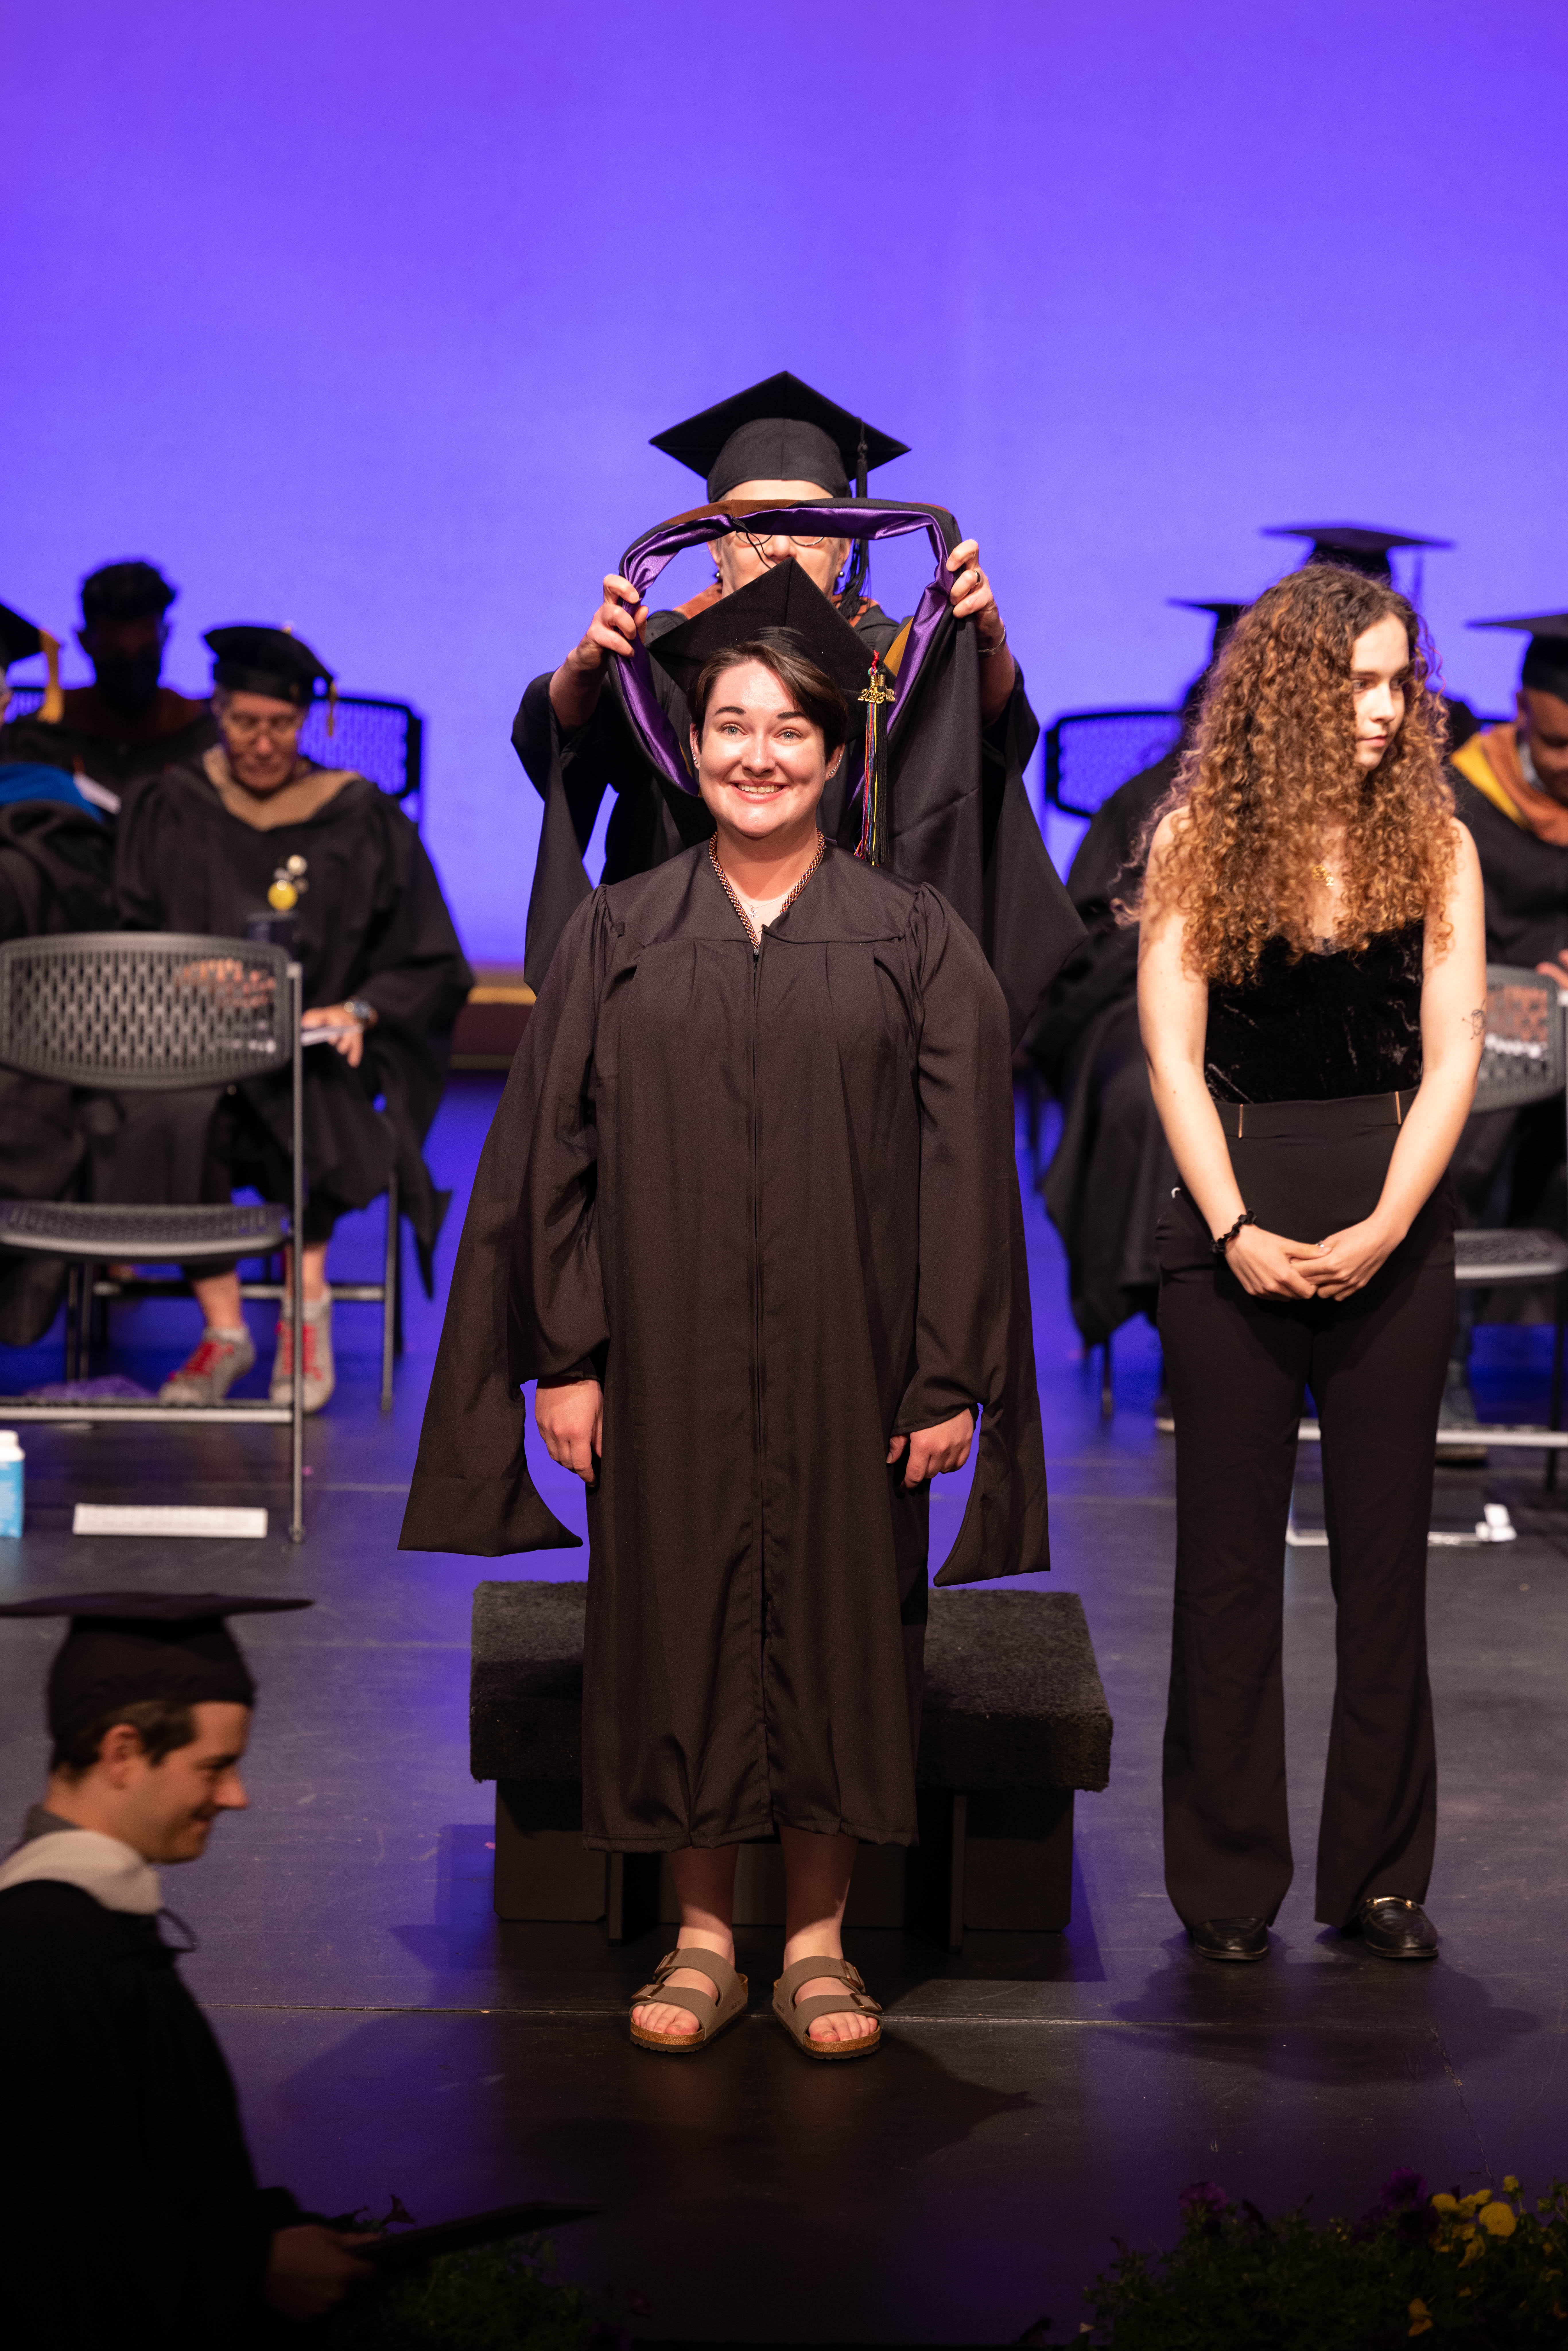 A graduation stands on stage receiving her stole